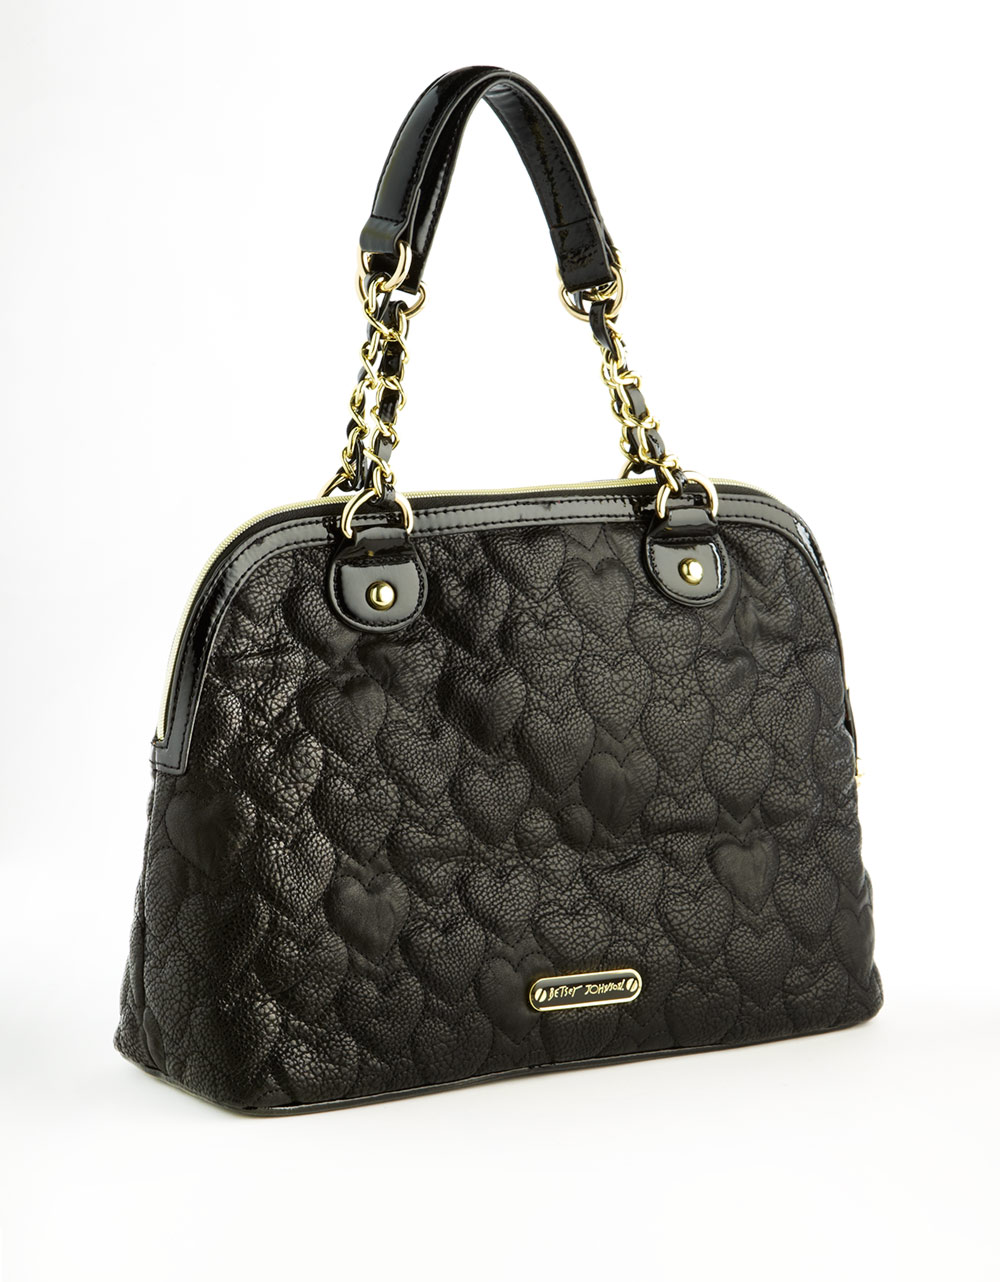 Lyst - Betsey johnson Yours Mine Ours Dome Satchel Bag in Black